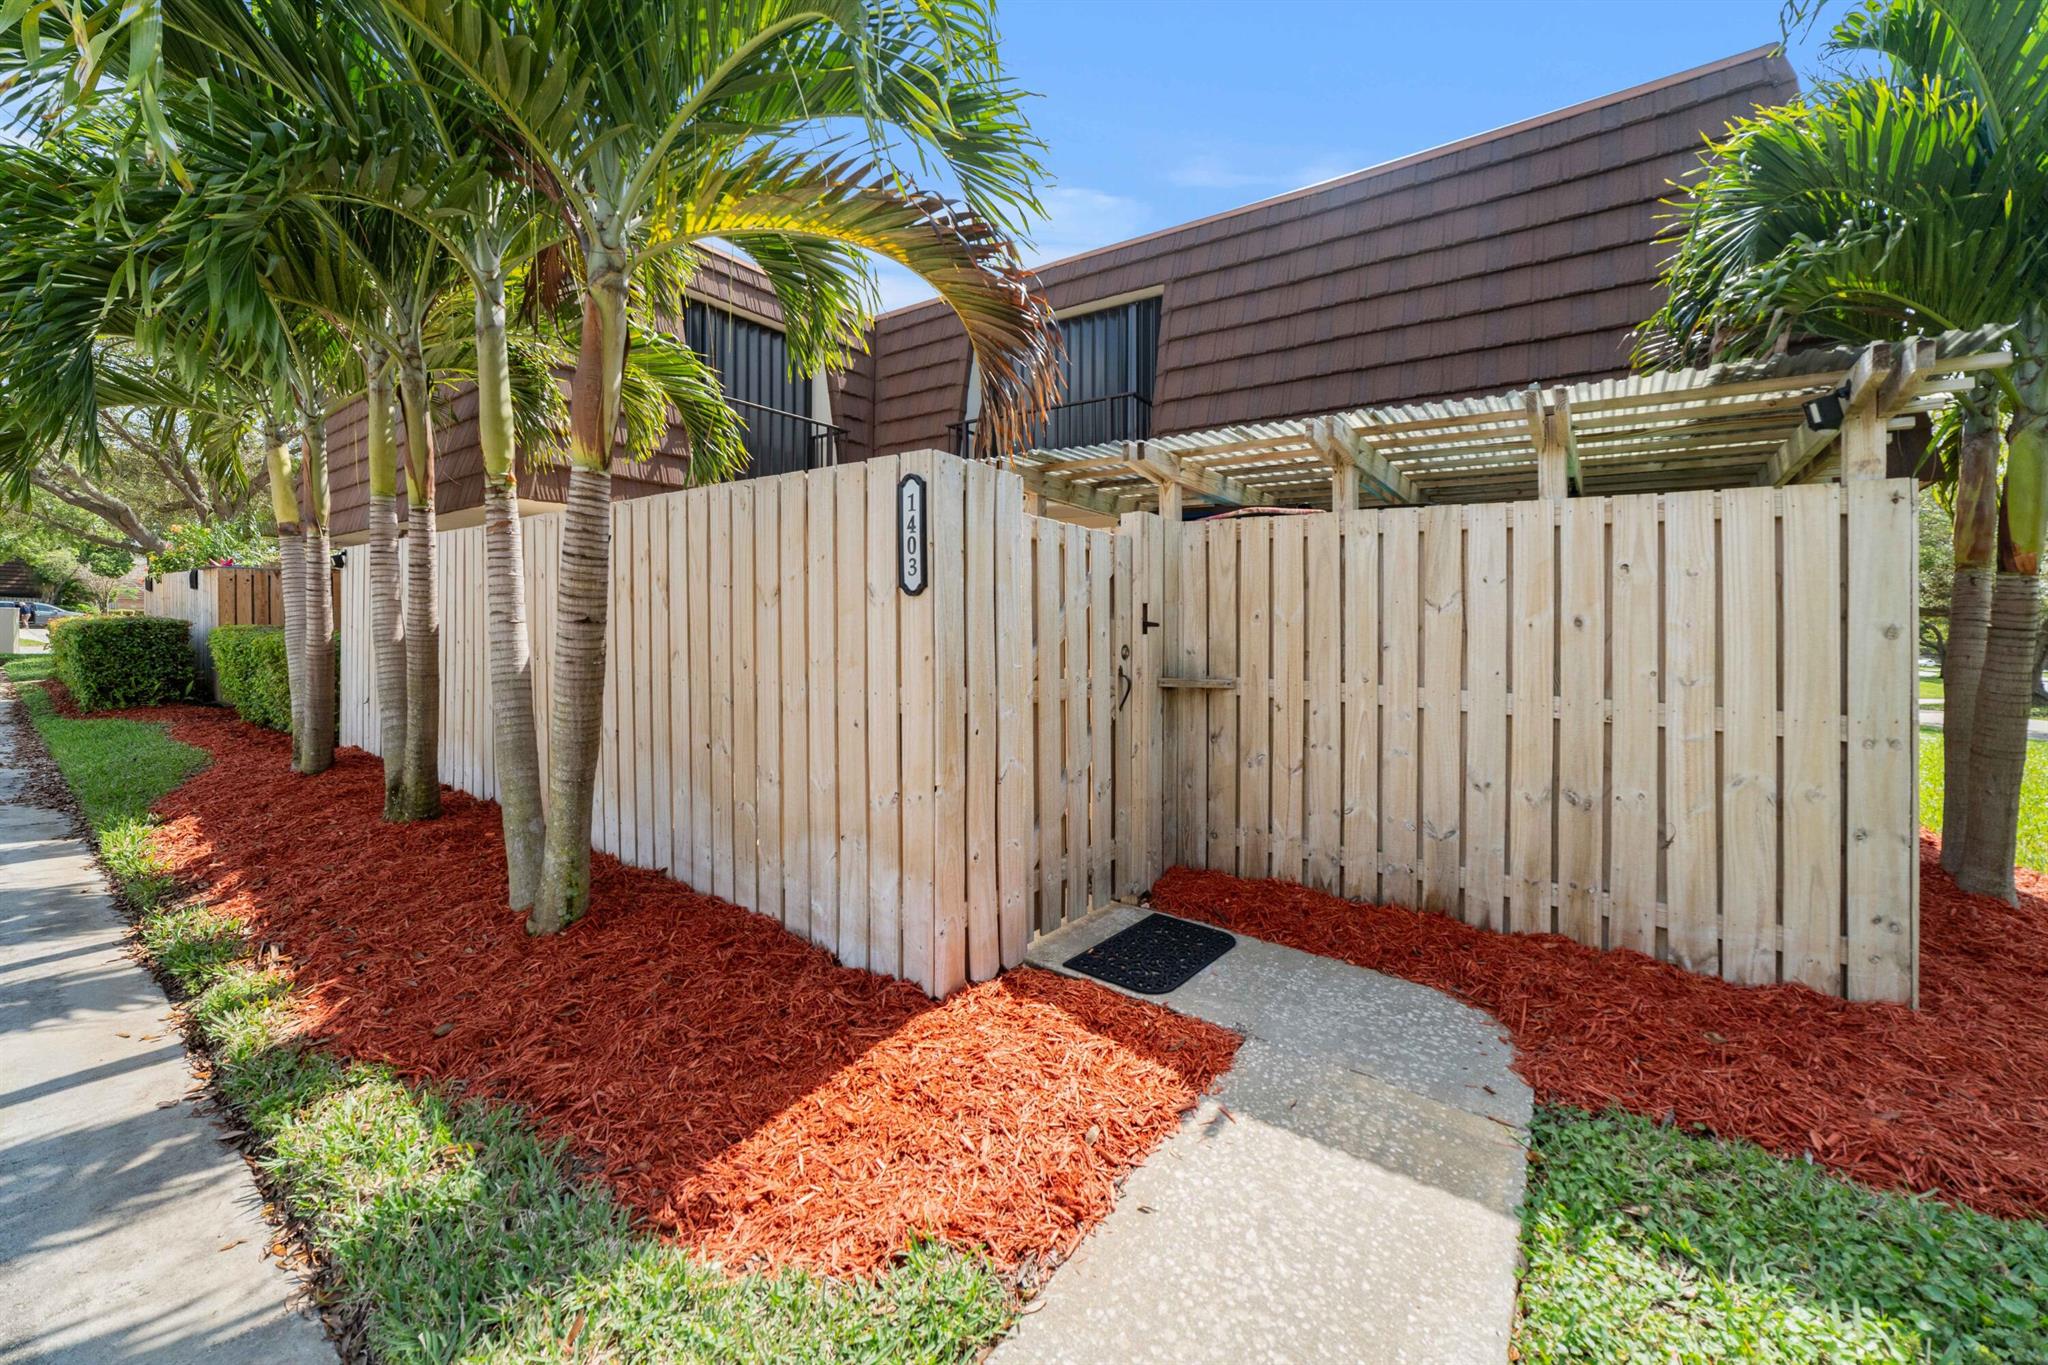 Move-in ready 2 bedroom, 2.5 bathroom townhouse with a den in Palm Beach Gardens! This versatile and quiet townhome boasts a large fenced courtyard, perfect for enjoying the Florida sunshine. Inside, you'll find an open living area ideal for entertaining, featuring a spacious living and dining area that flows seamlessly into an impressive kitchen.  A convenient half bathroom and laundry room are located downstairs, along with a den that can easily be converted into a third bedroom or home office. Upstairs, two spacious bedrooms await, including a primary suite with a large bathroom. This Palm Beach Gardens townhouse offers the perfect blend of functionality and comfort, all in a desirable location and walkable to schools and shopping. Don't miss your chance to make it your own!